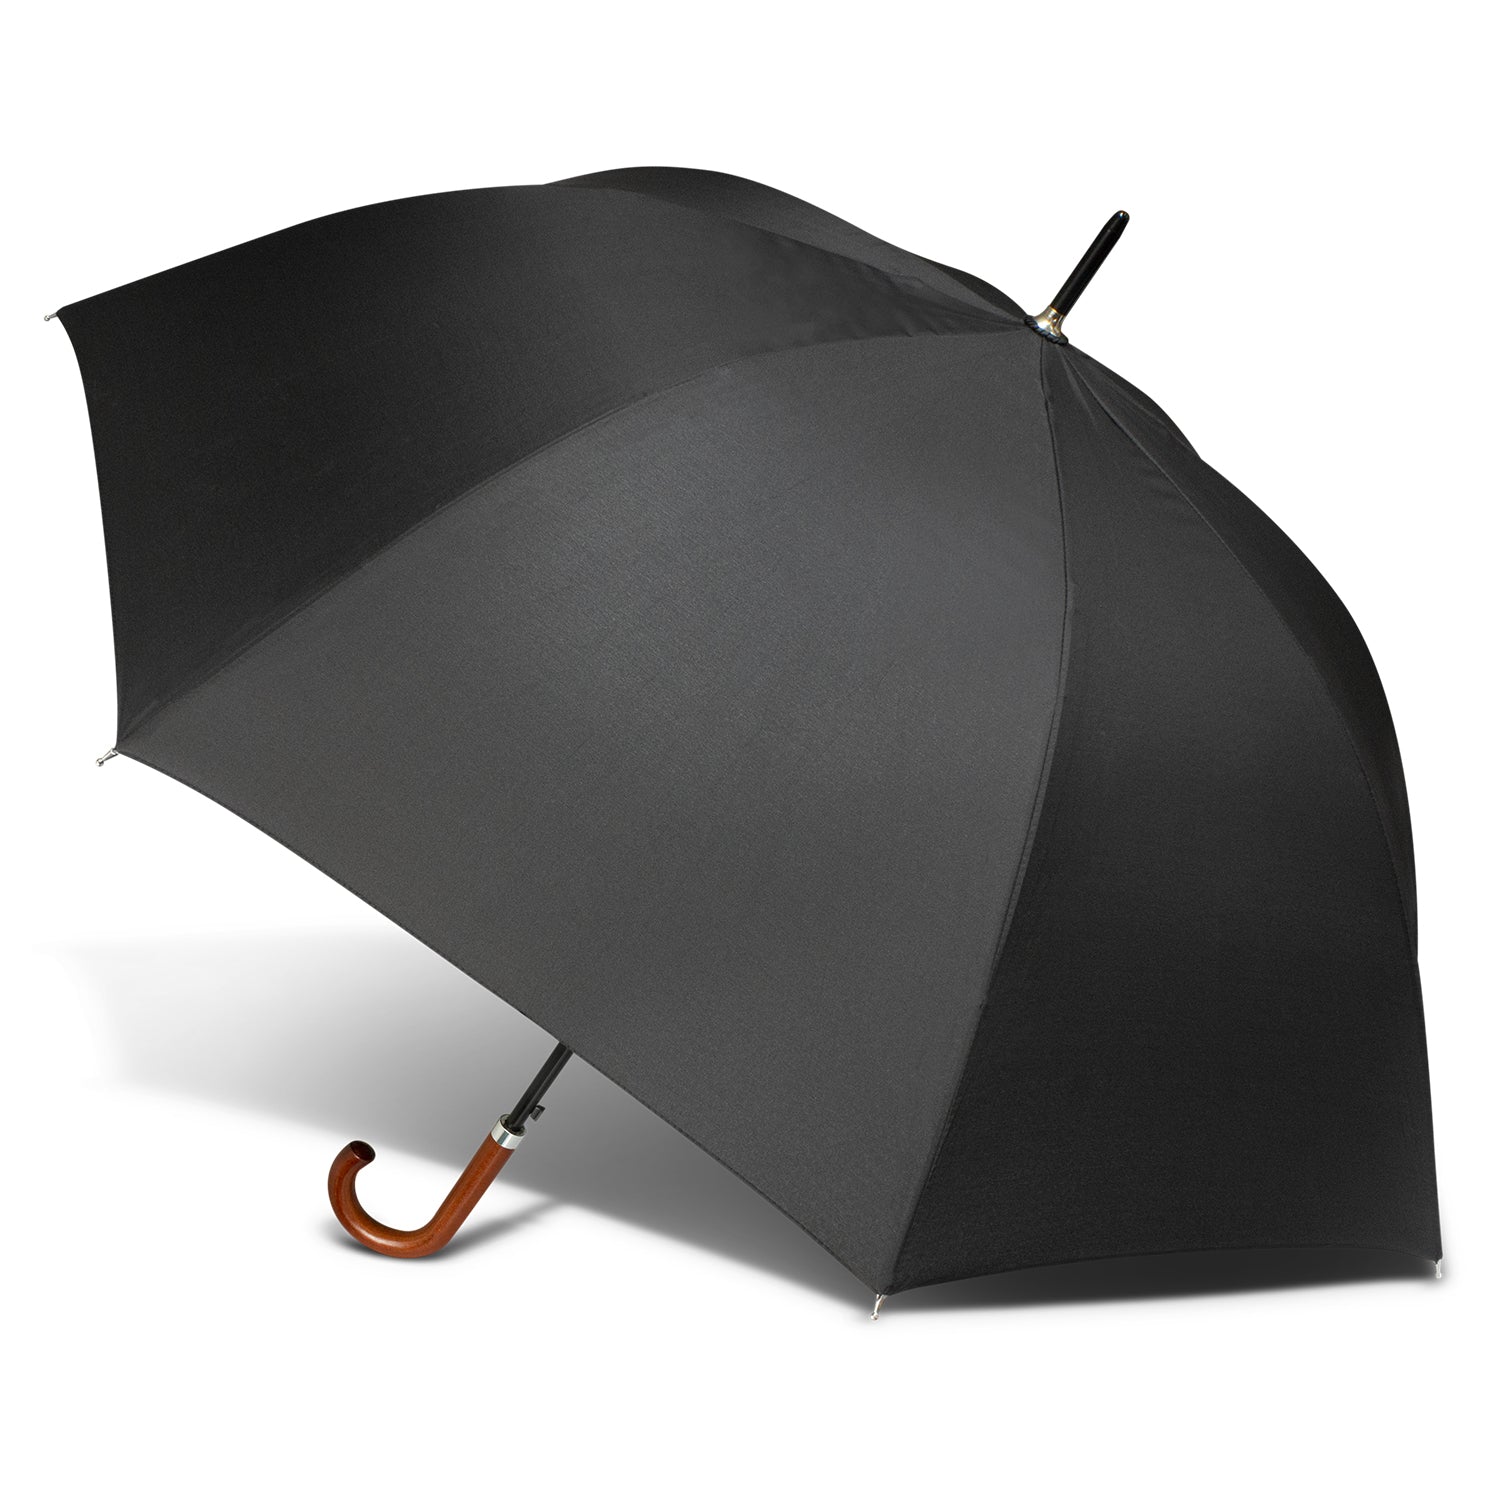 STORMPROOF®️ Corporate Executive Hook Umbrella With Premium Pongee Canopy, Wind Resistant Frame, Steel Shaft, With Auto-Open Push Button Feature - Premium Wooden Hook Handle